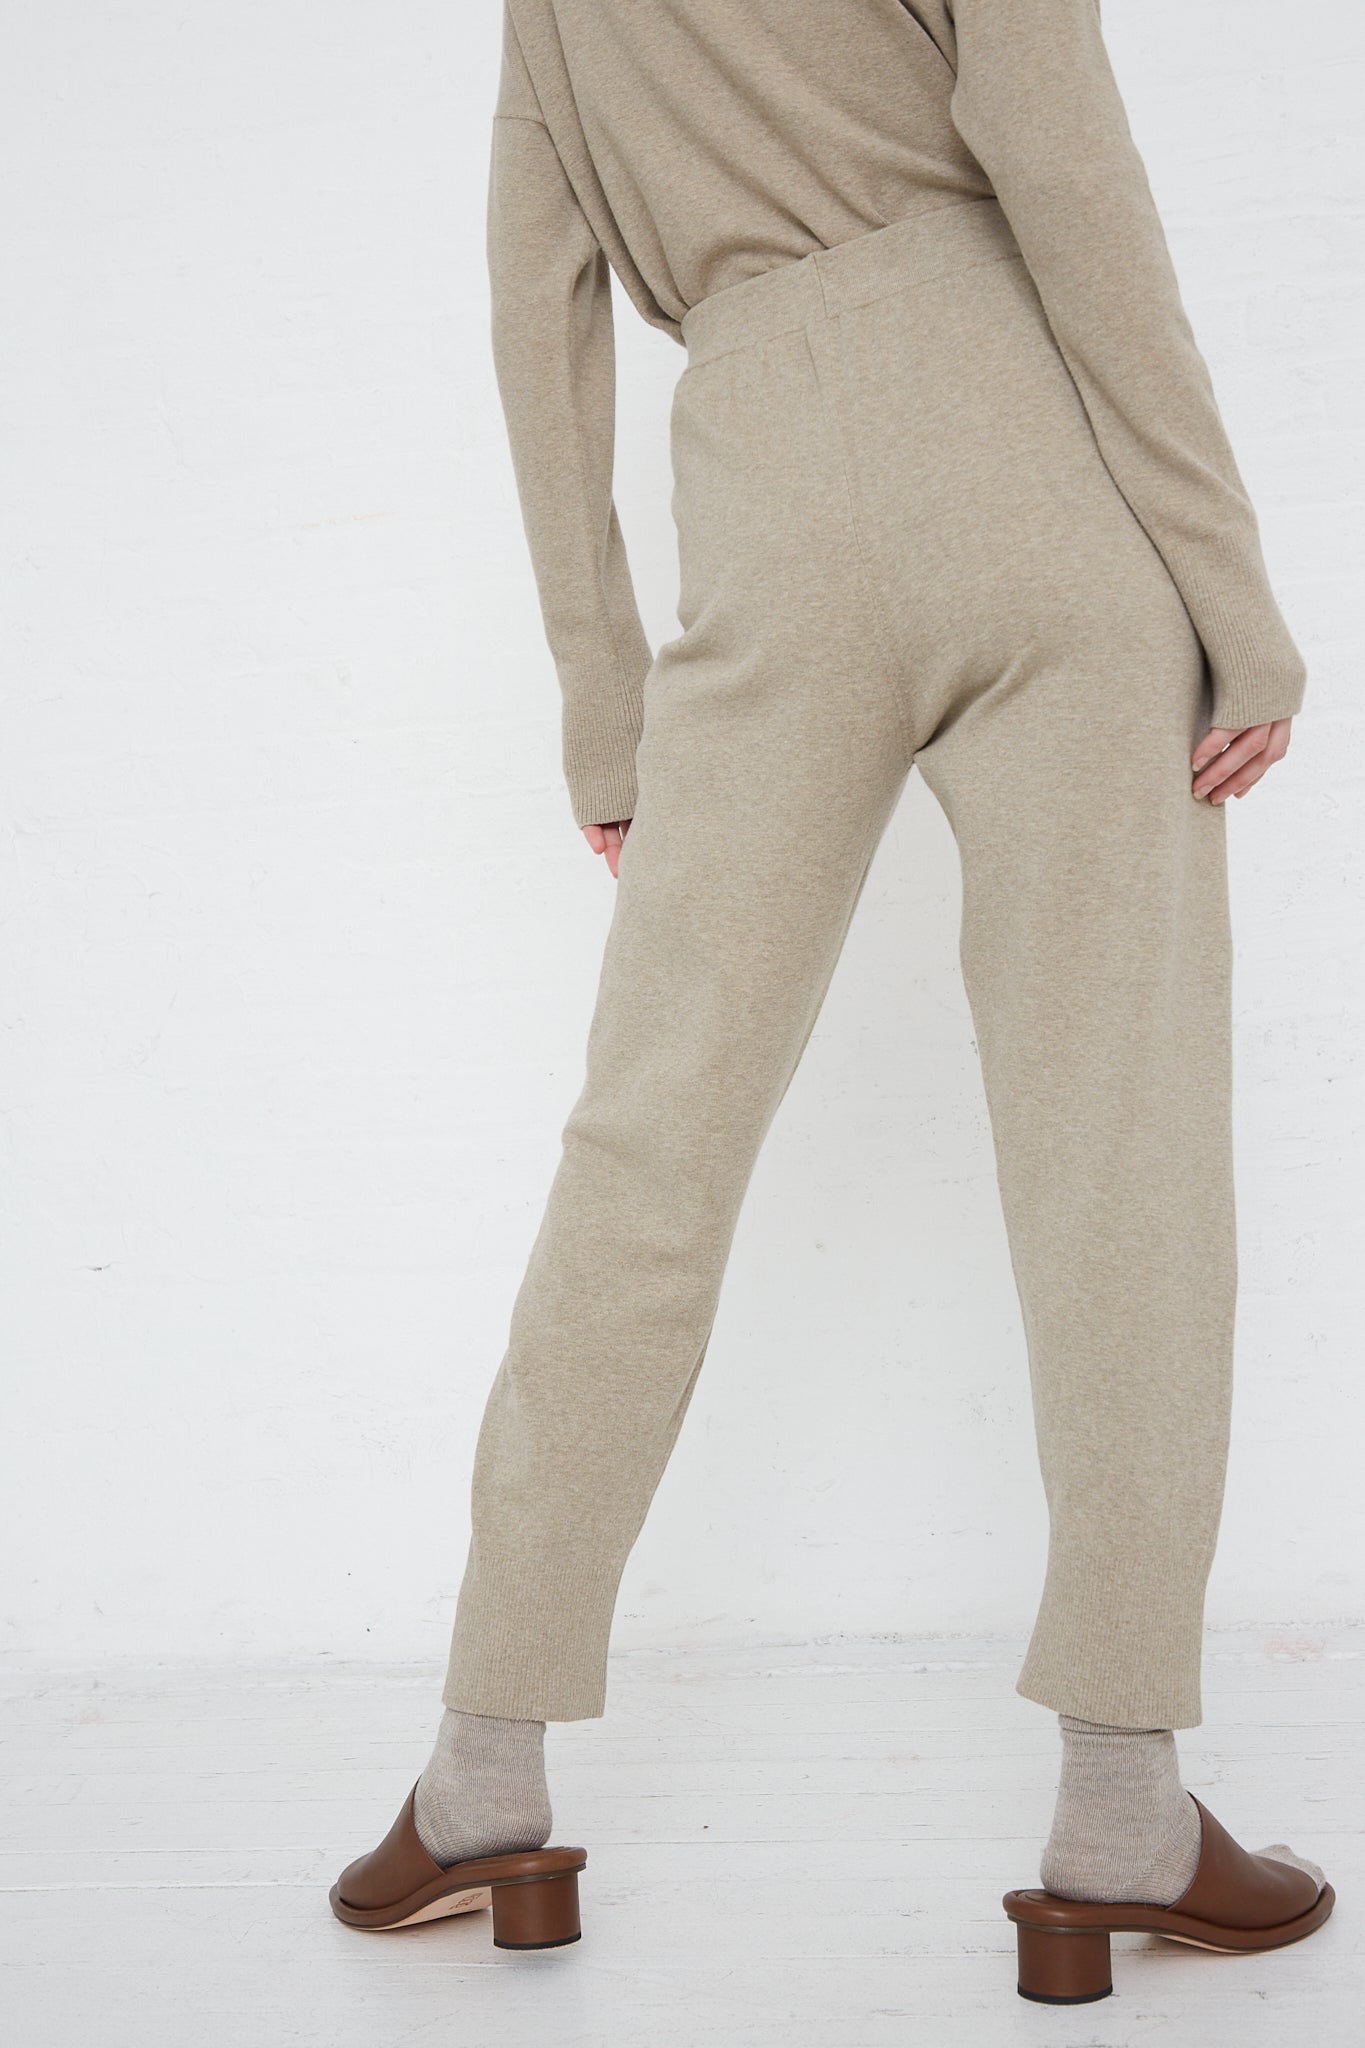 The back view of a woman wearing Lauren Manoogian's Base Pant in Stone Melange beige sweater and relaxed fit pants with an elasticated waist.